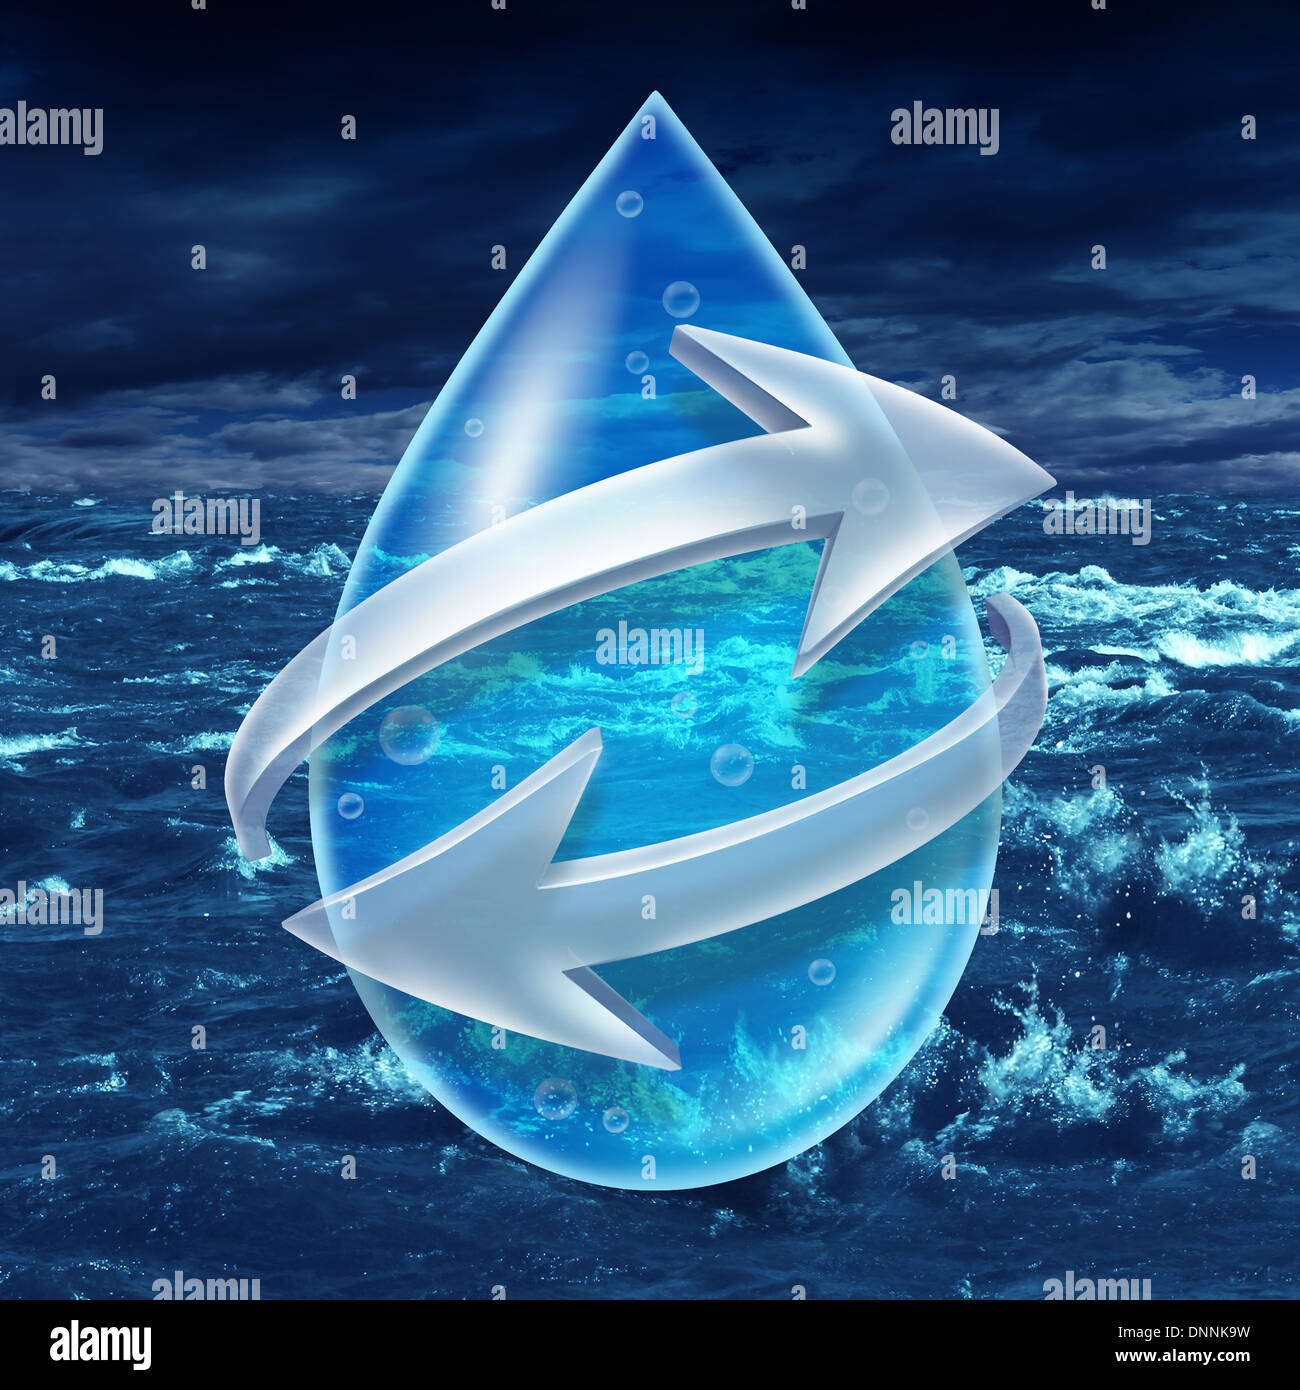 Water sanitation and recycling H2o concept with a water droplet encircled with two arrows on an ocean or body of water with waves as a metaphor for clean purified drinking without the fear of toxic contamination. Stock Photo